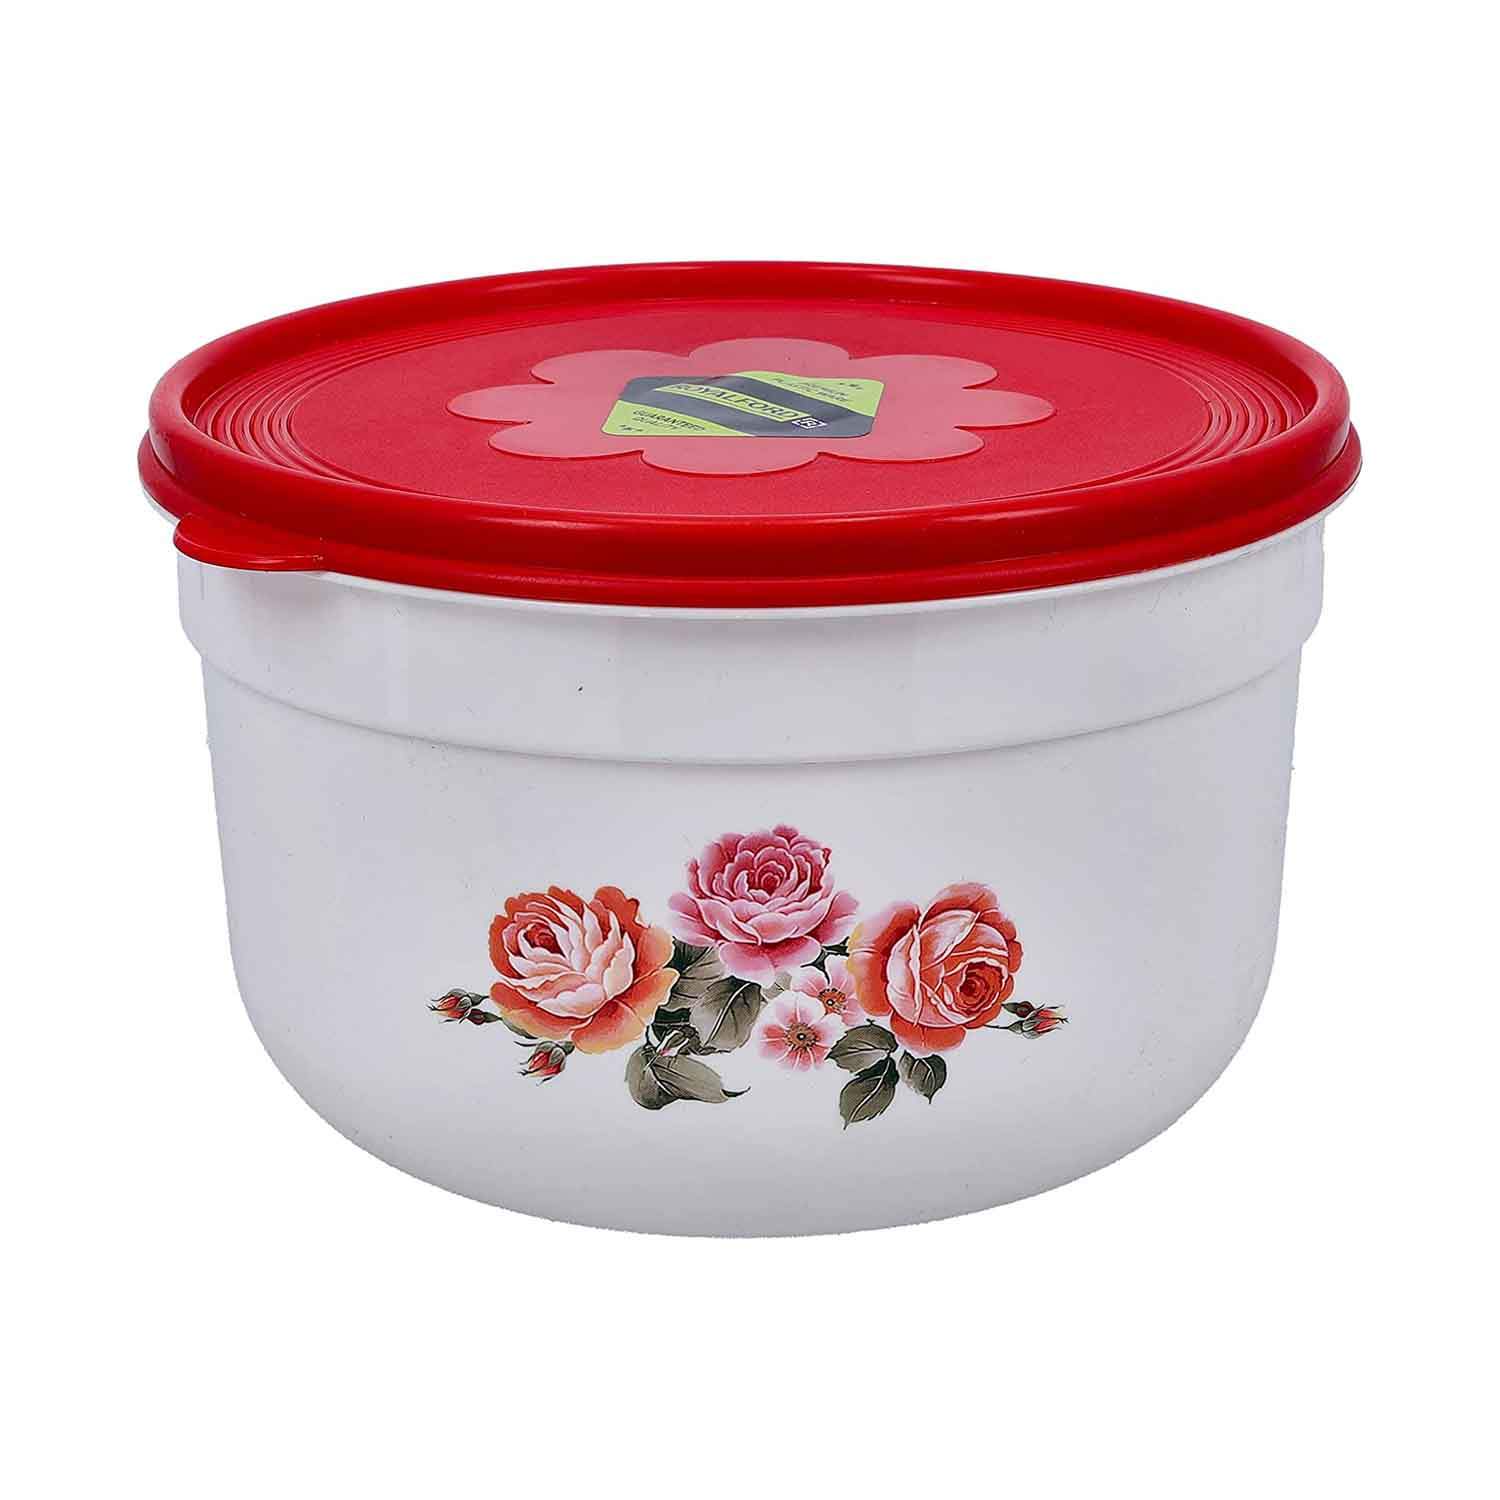 Royalford Round Storage Bowl, 3L Plastic Food Container, Rf10870 | Air-Tight Lid Bpa-Free Box | Suitable For Dishwasher, Freezer | Meal Prep Storage Tubs